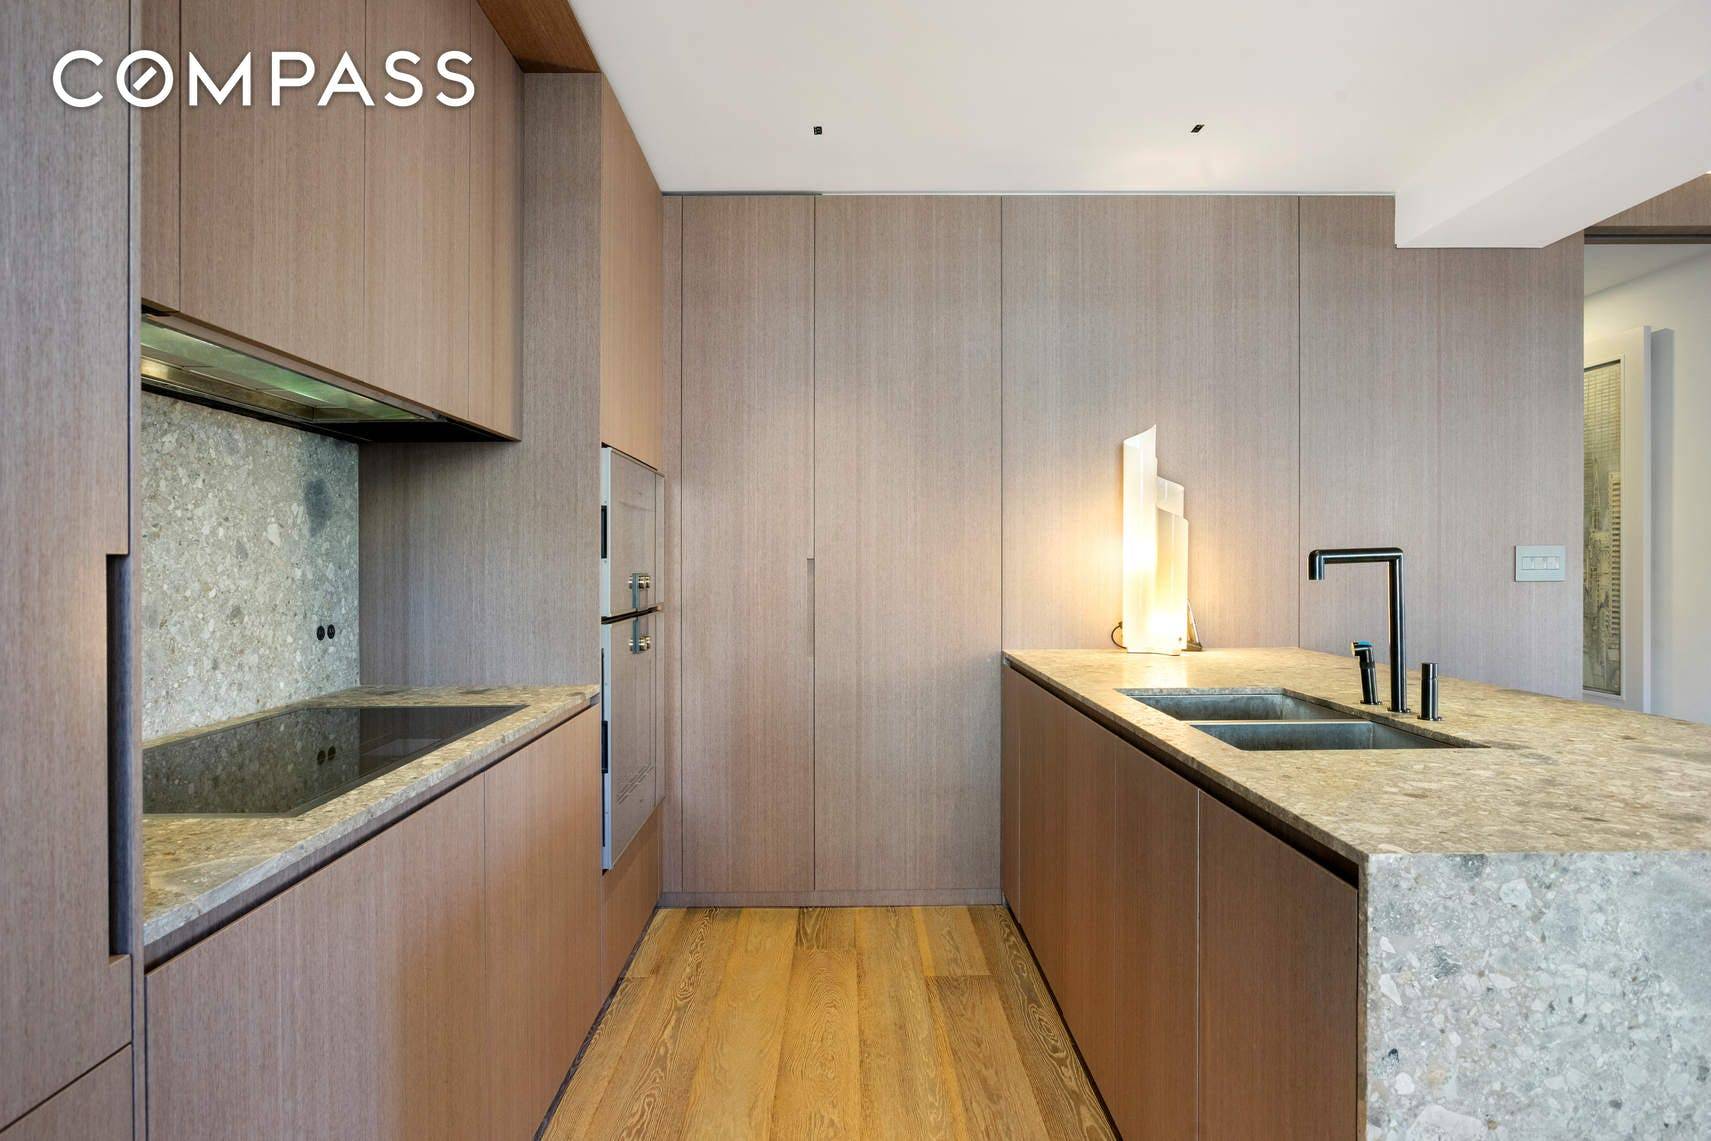 This impeccably renovated corner 3BR 3BA apartment in a full service pre war coop is the finest apartment on the market in Greenwich Village right now.